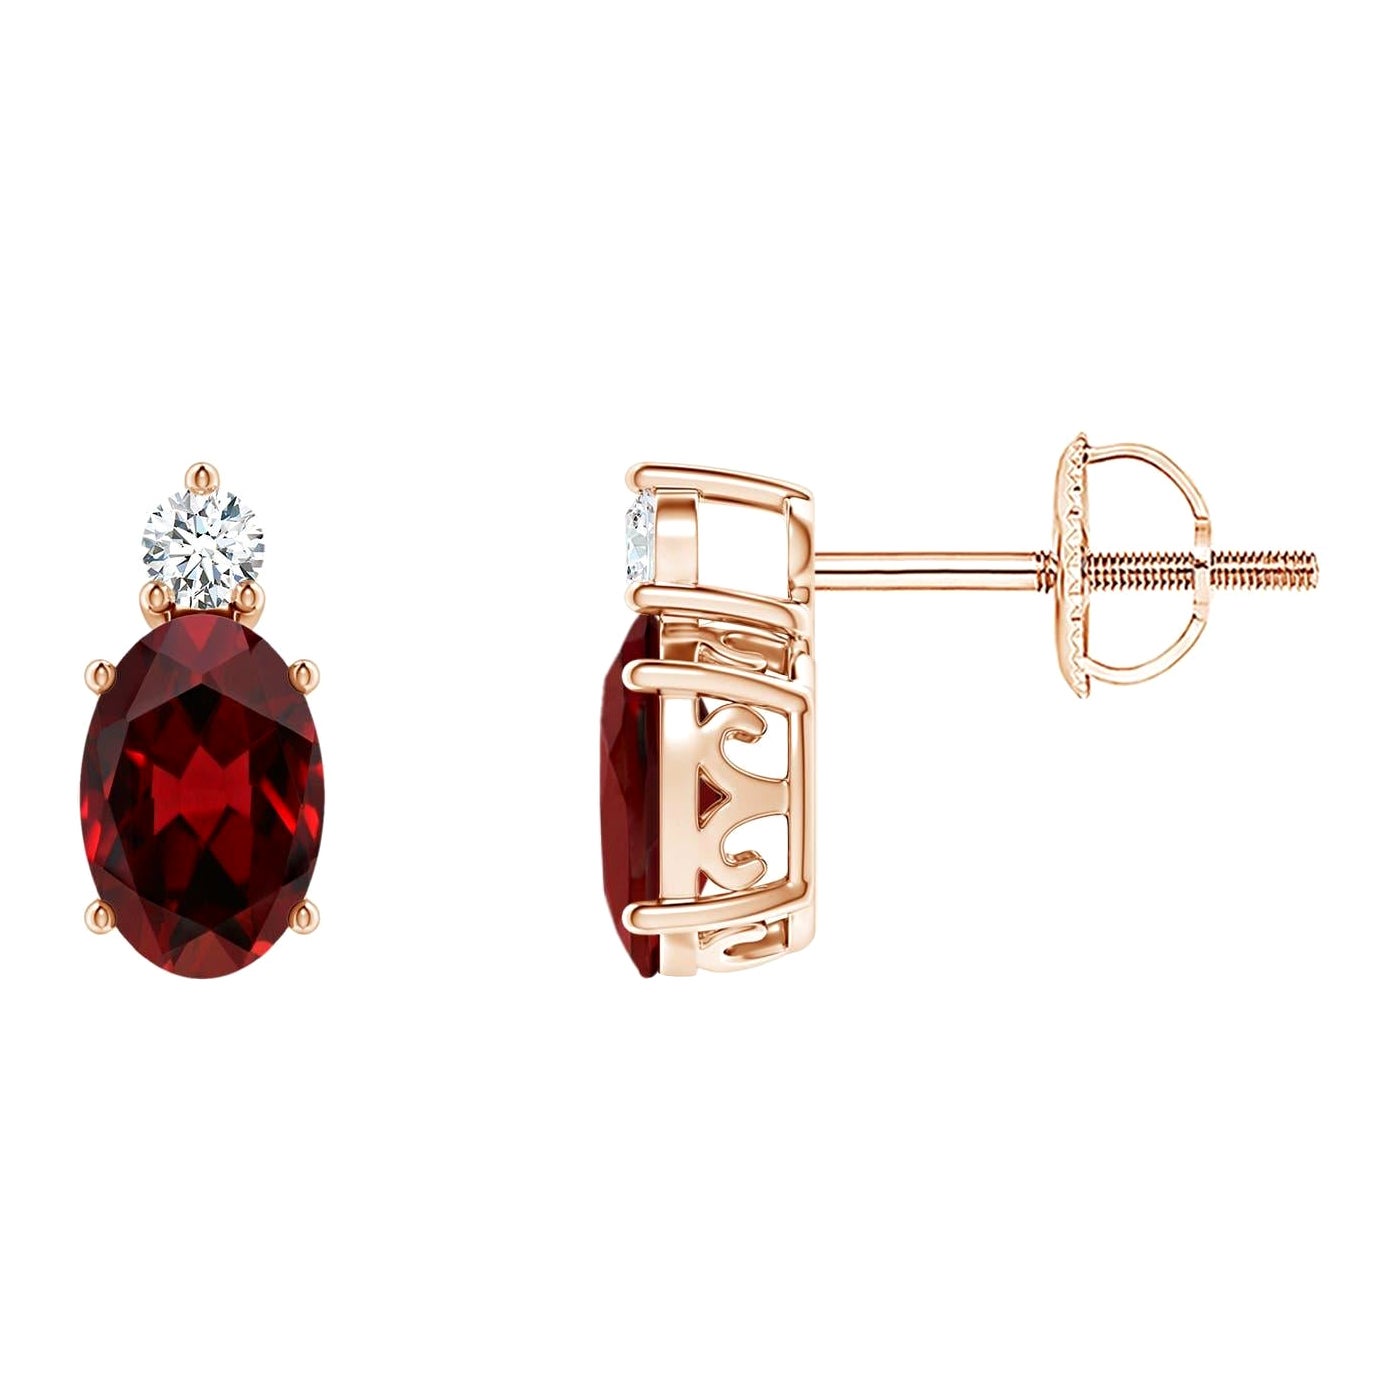 Natural Oval 1.1ct Garnet Stud Earrings w/ Diamond in 14K Rose Gold (Size-6x4mm) For Sale